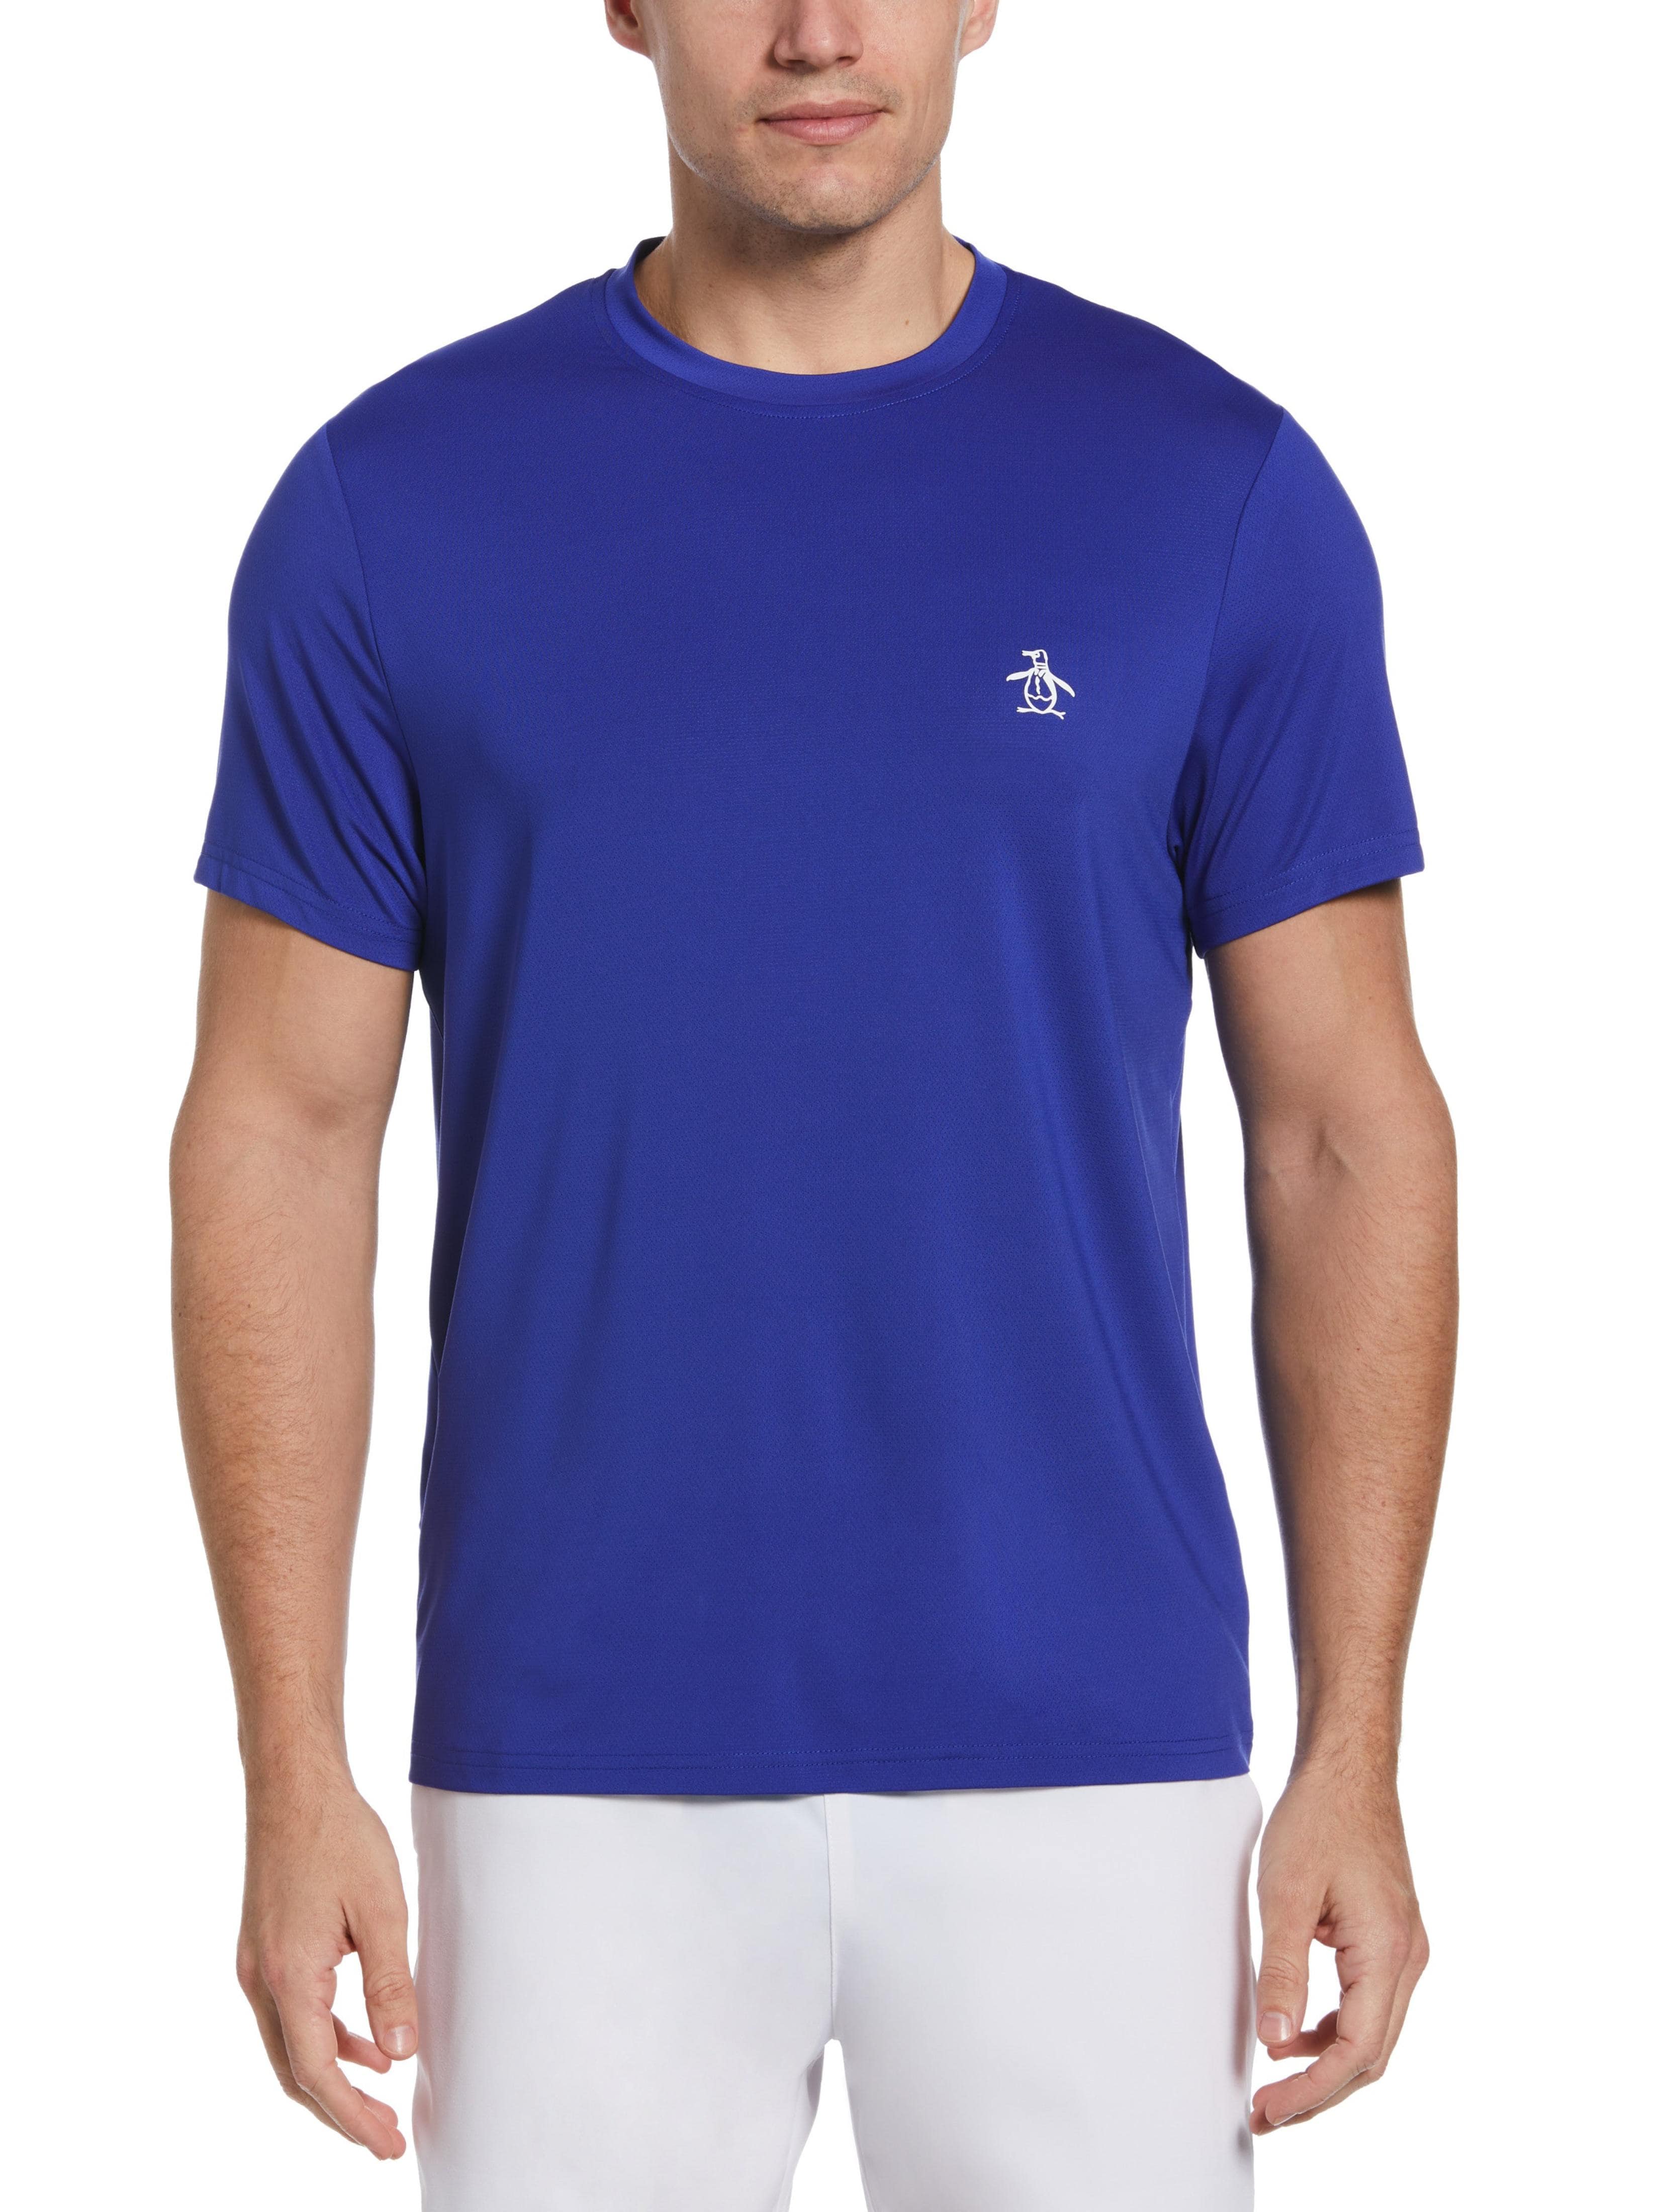 Original Penguin Mens Solid Performance Tennis T-Shirt, Size Small, Blueing, Polyester/Recycled Polyester/Elastane | Golf Apparel Shop